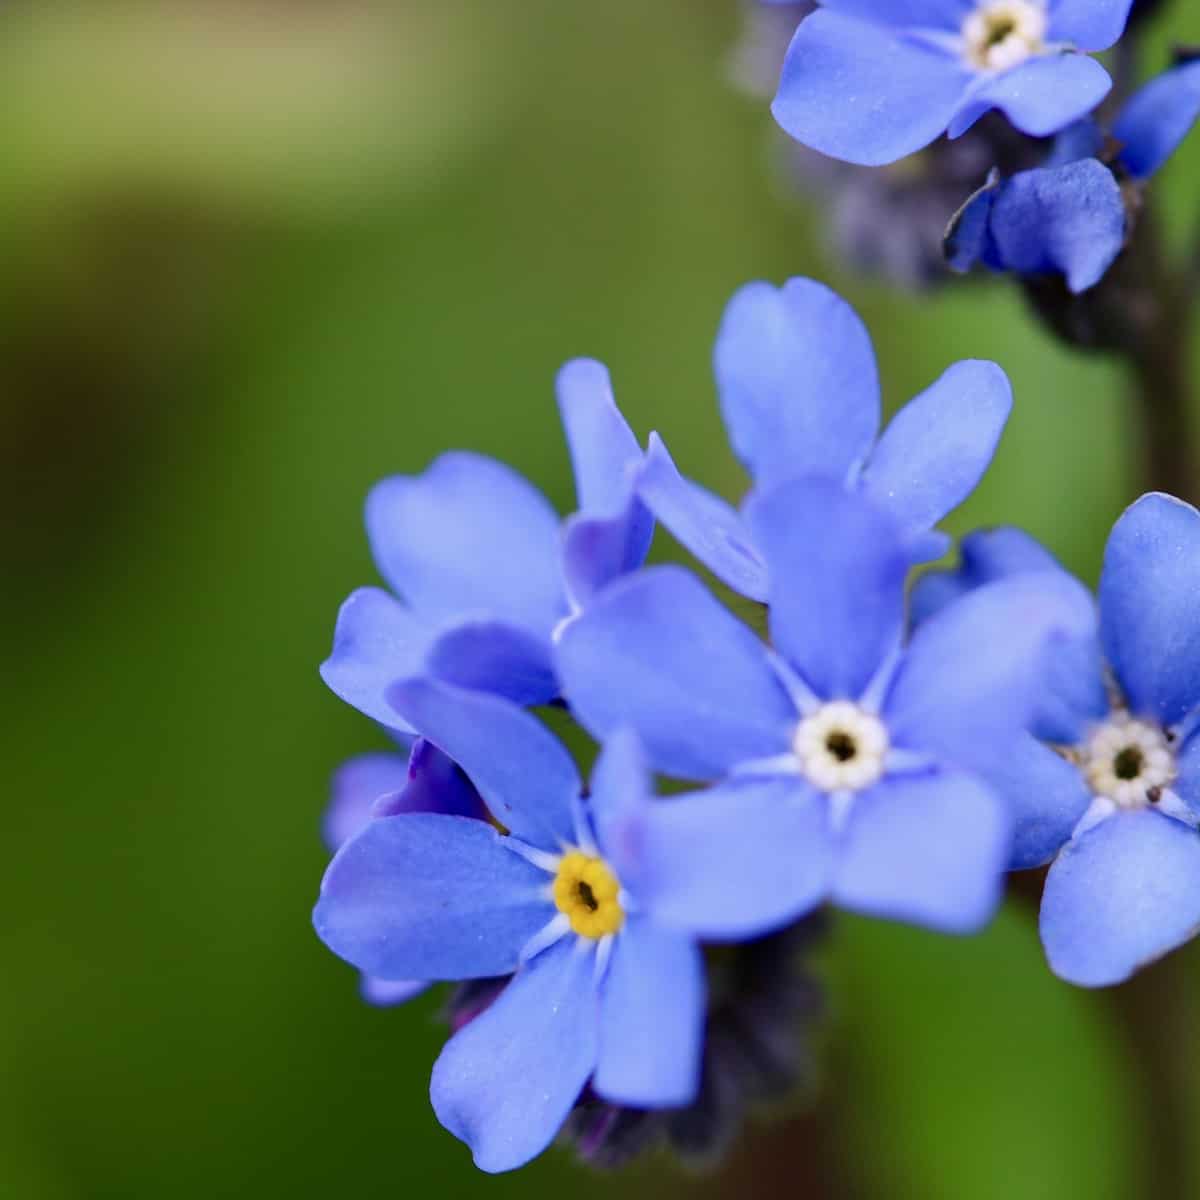 Blue forget me not flowers.